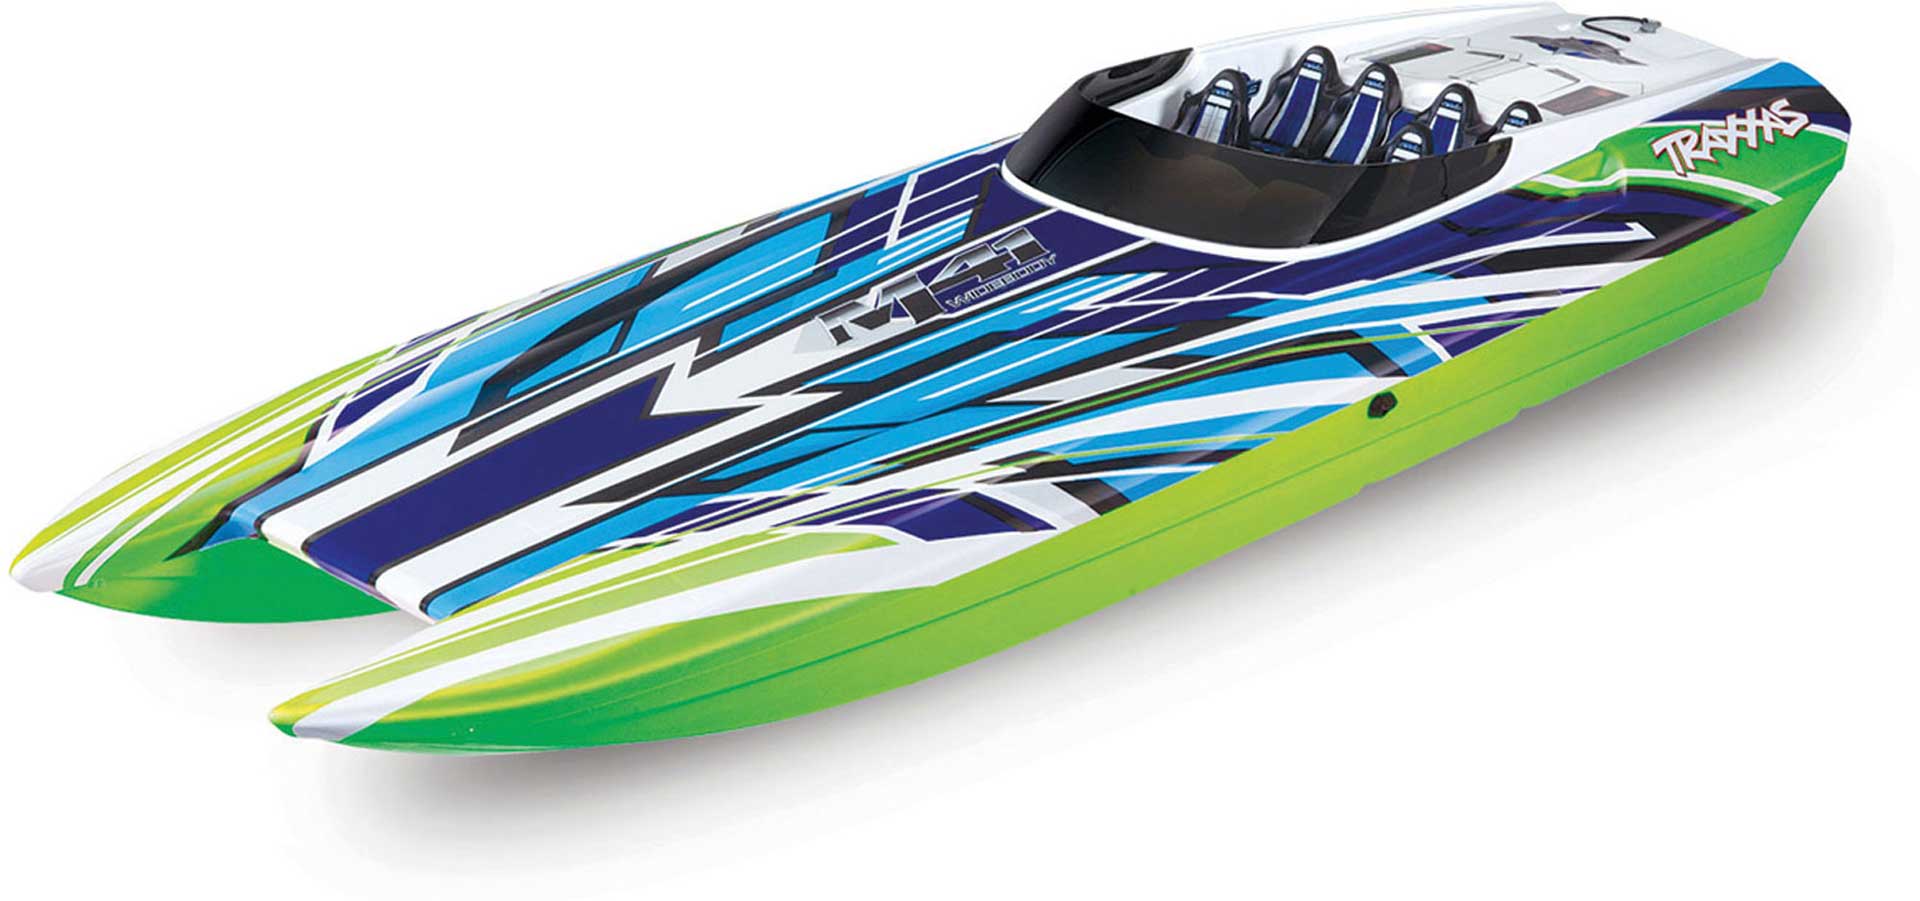 TRAXXAS DCB M41 Green-X 40 inch brushless Cata- maran race boat without batt./loader